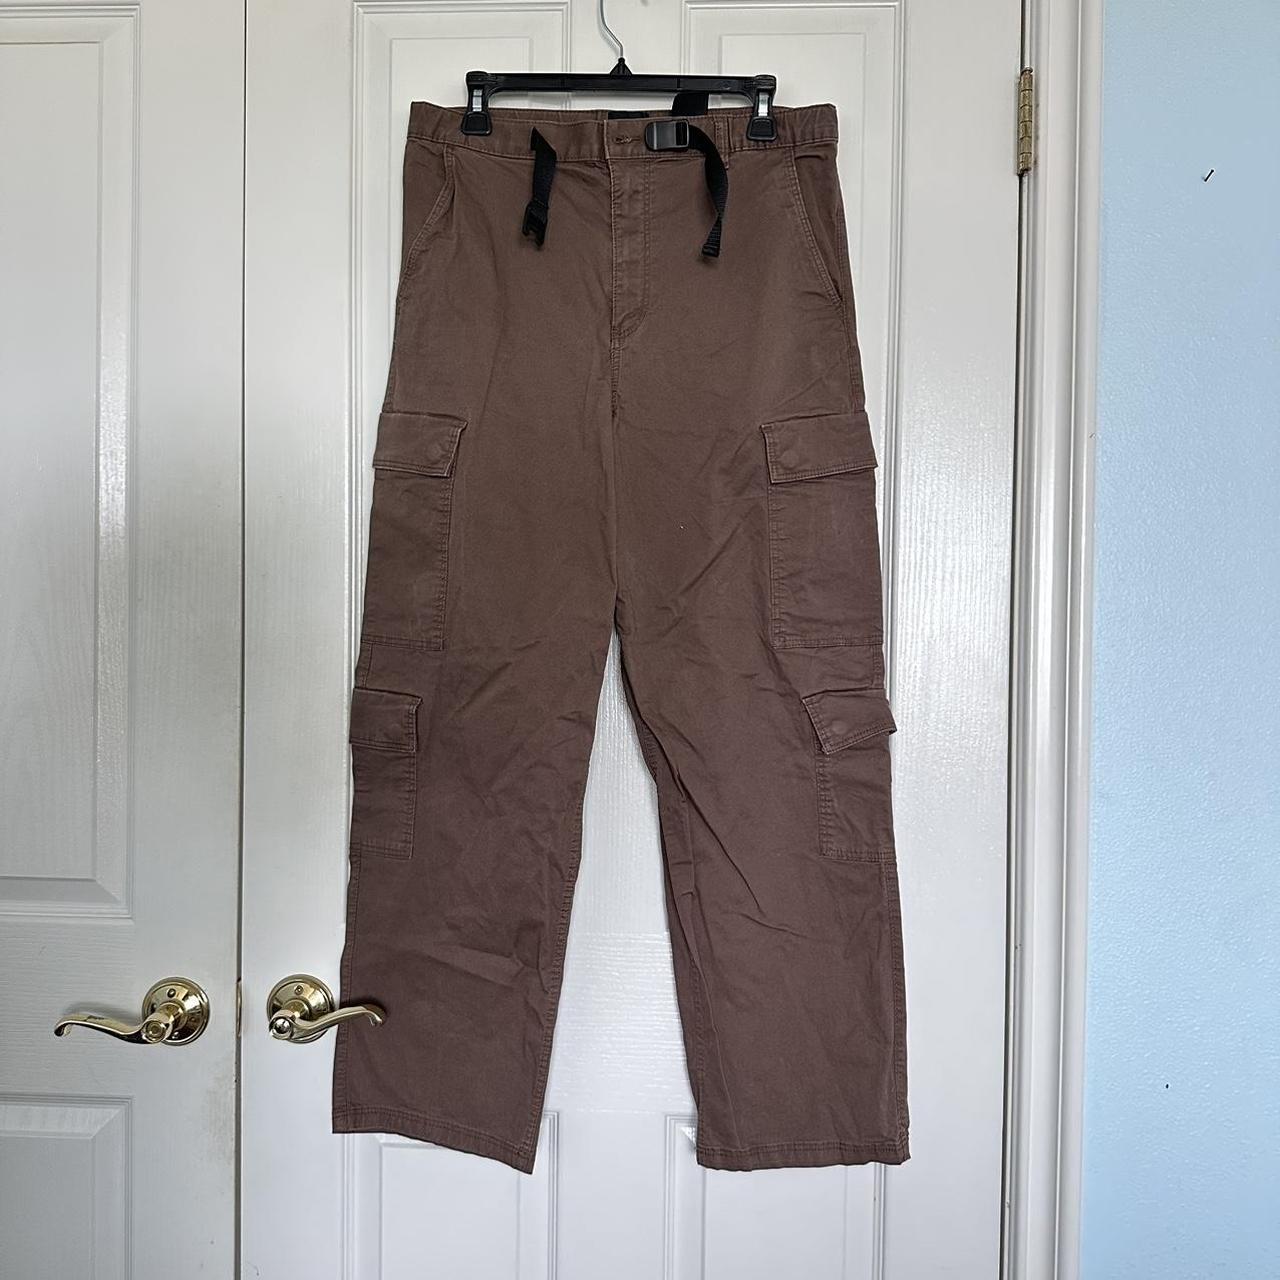 H&M Baggy Cargo Pants Size 30 Great Condition and No... - Depop